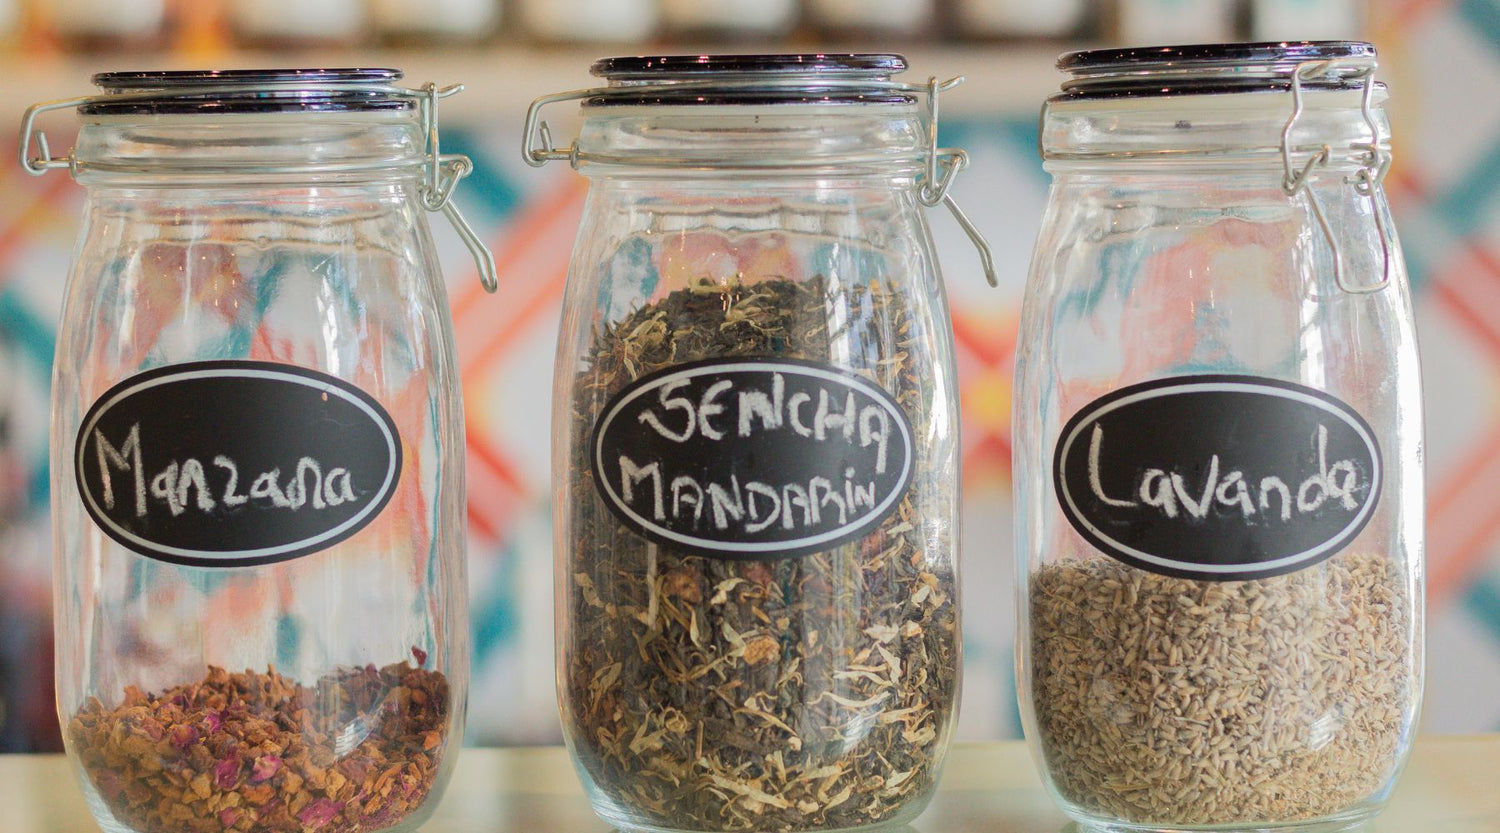 6 benefits of labeling your spices